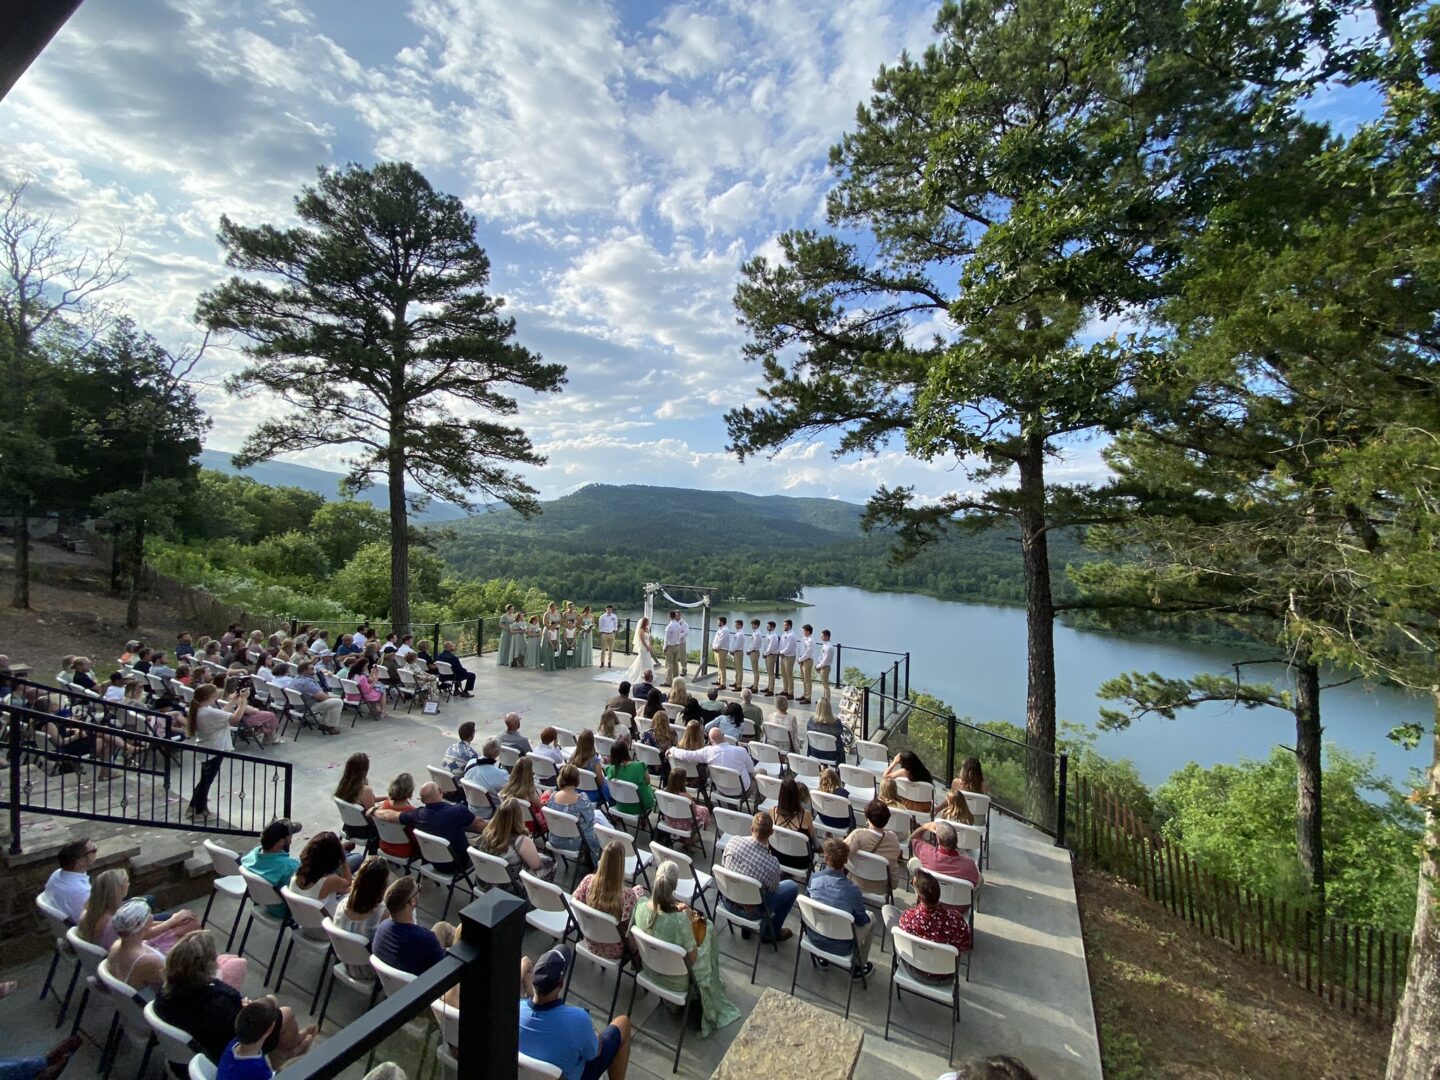 A crowd of people sitting on chairs near the water.